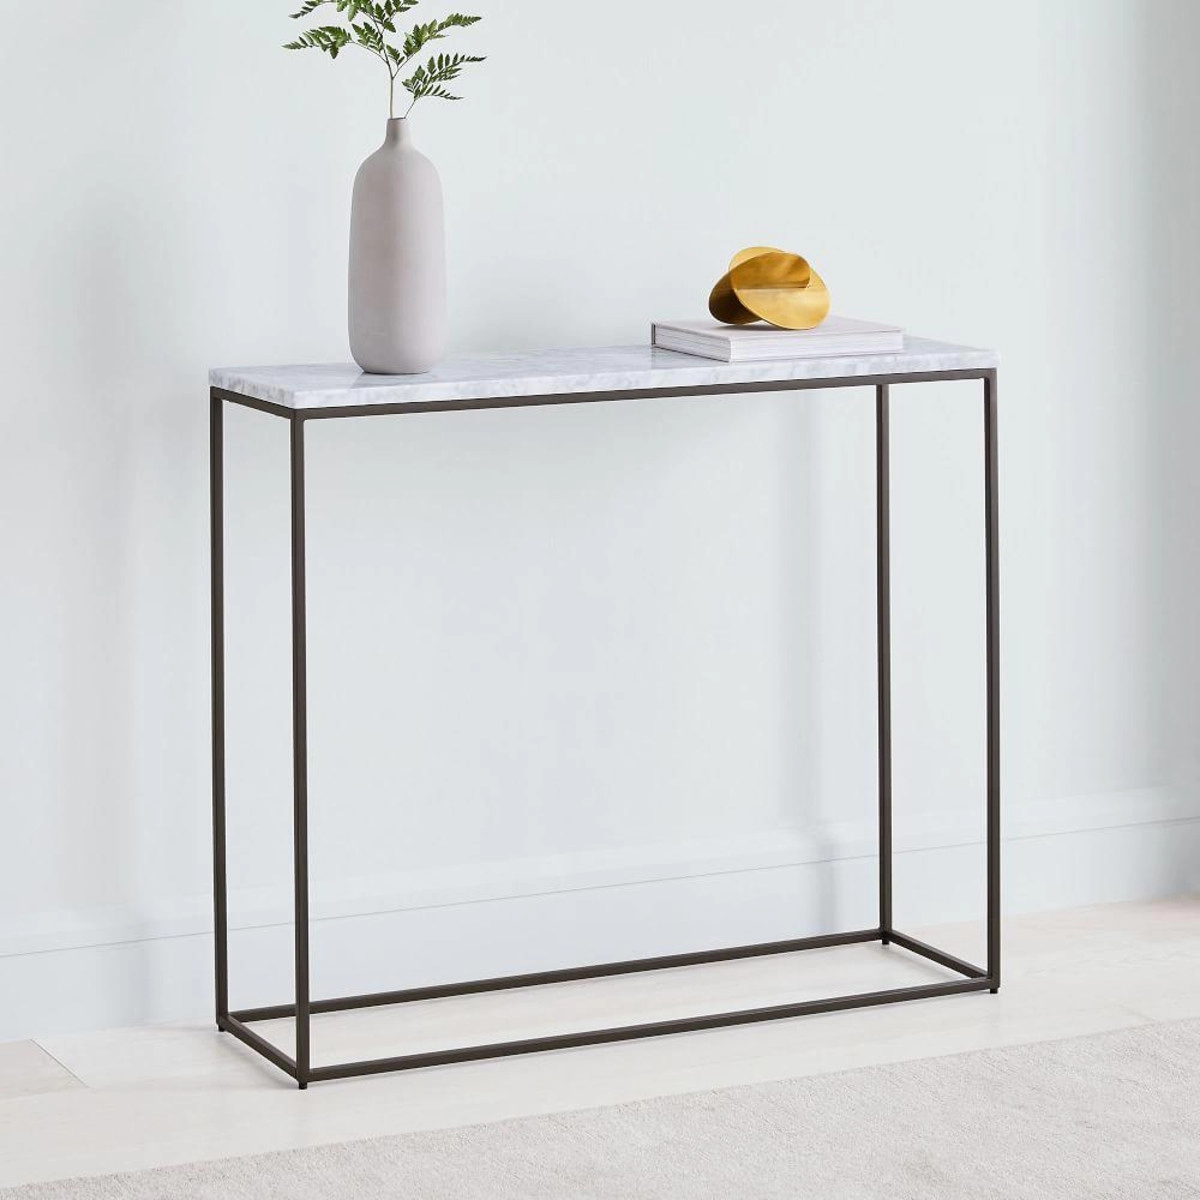 Hallway|Entryway Streamline Console Table With Marble Top